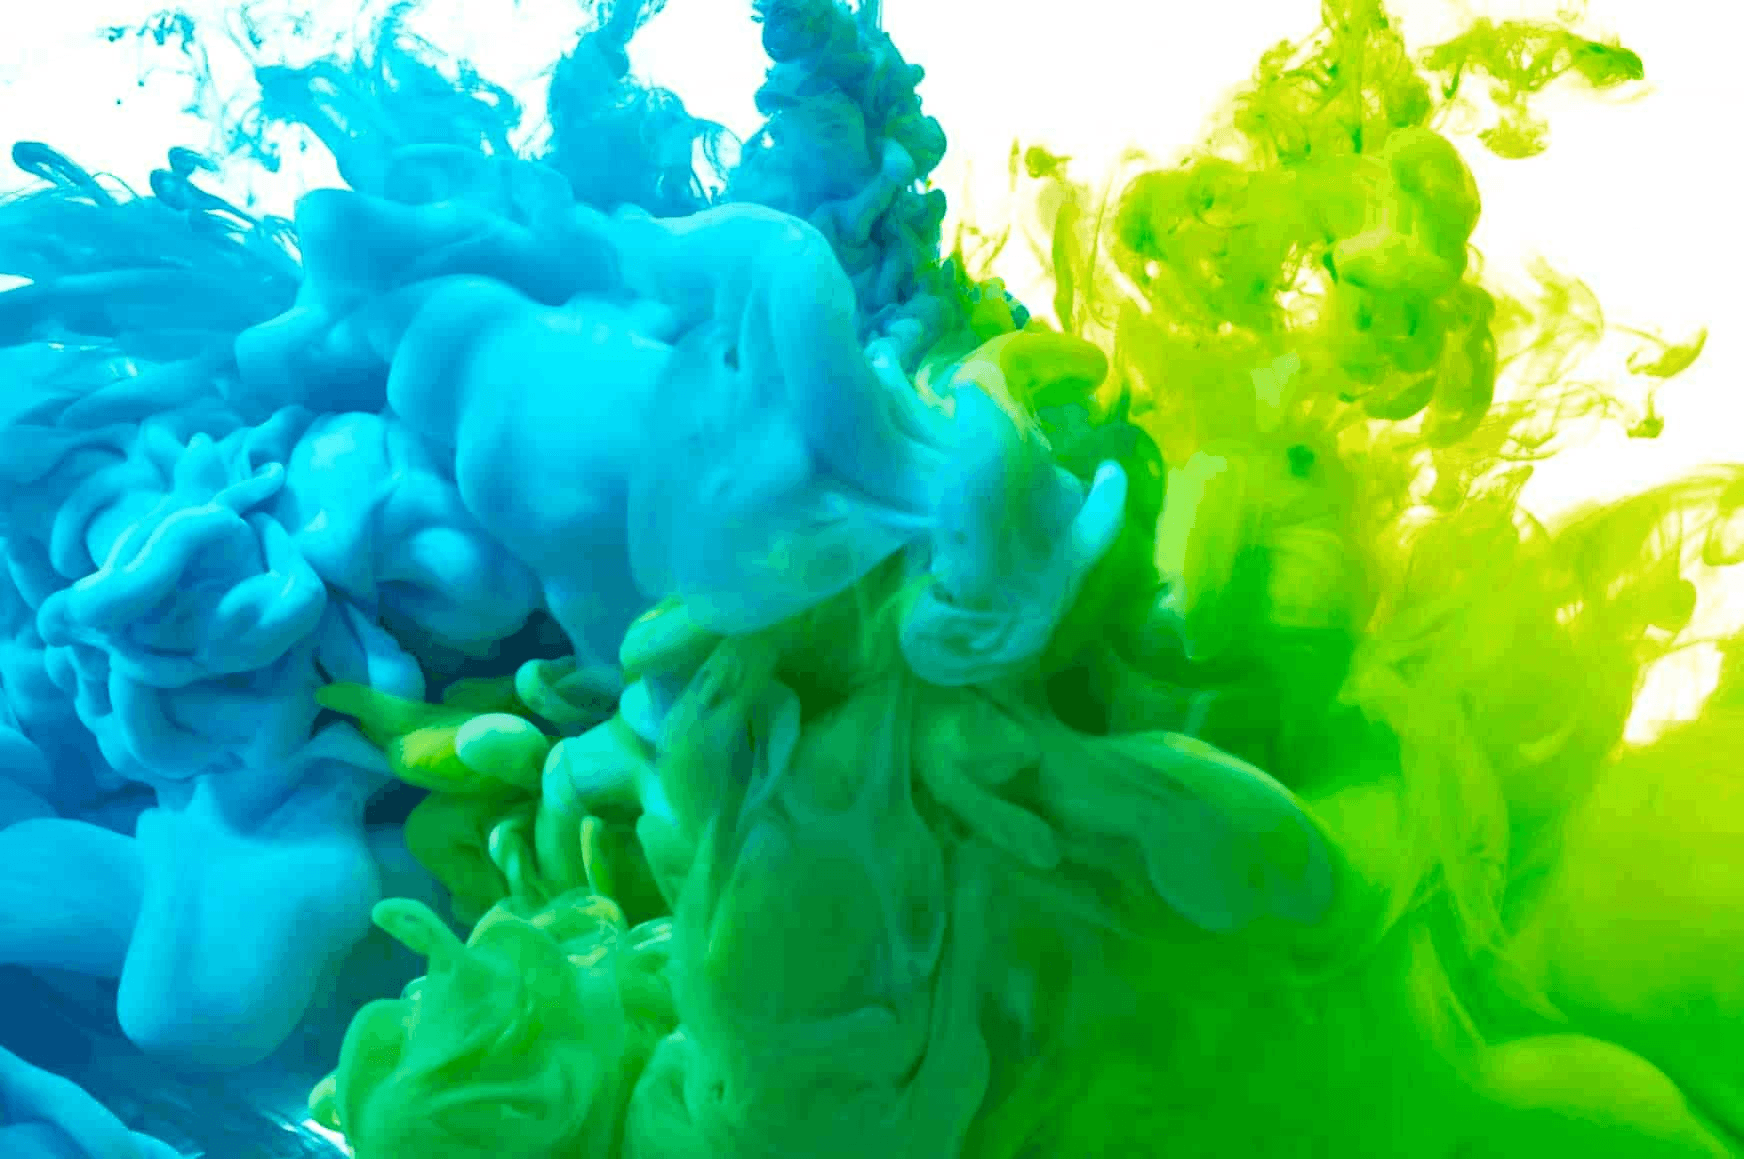 Vibrant blue and green ink swirling in water